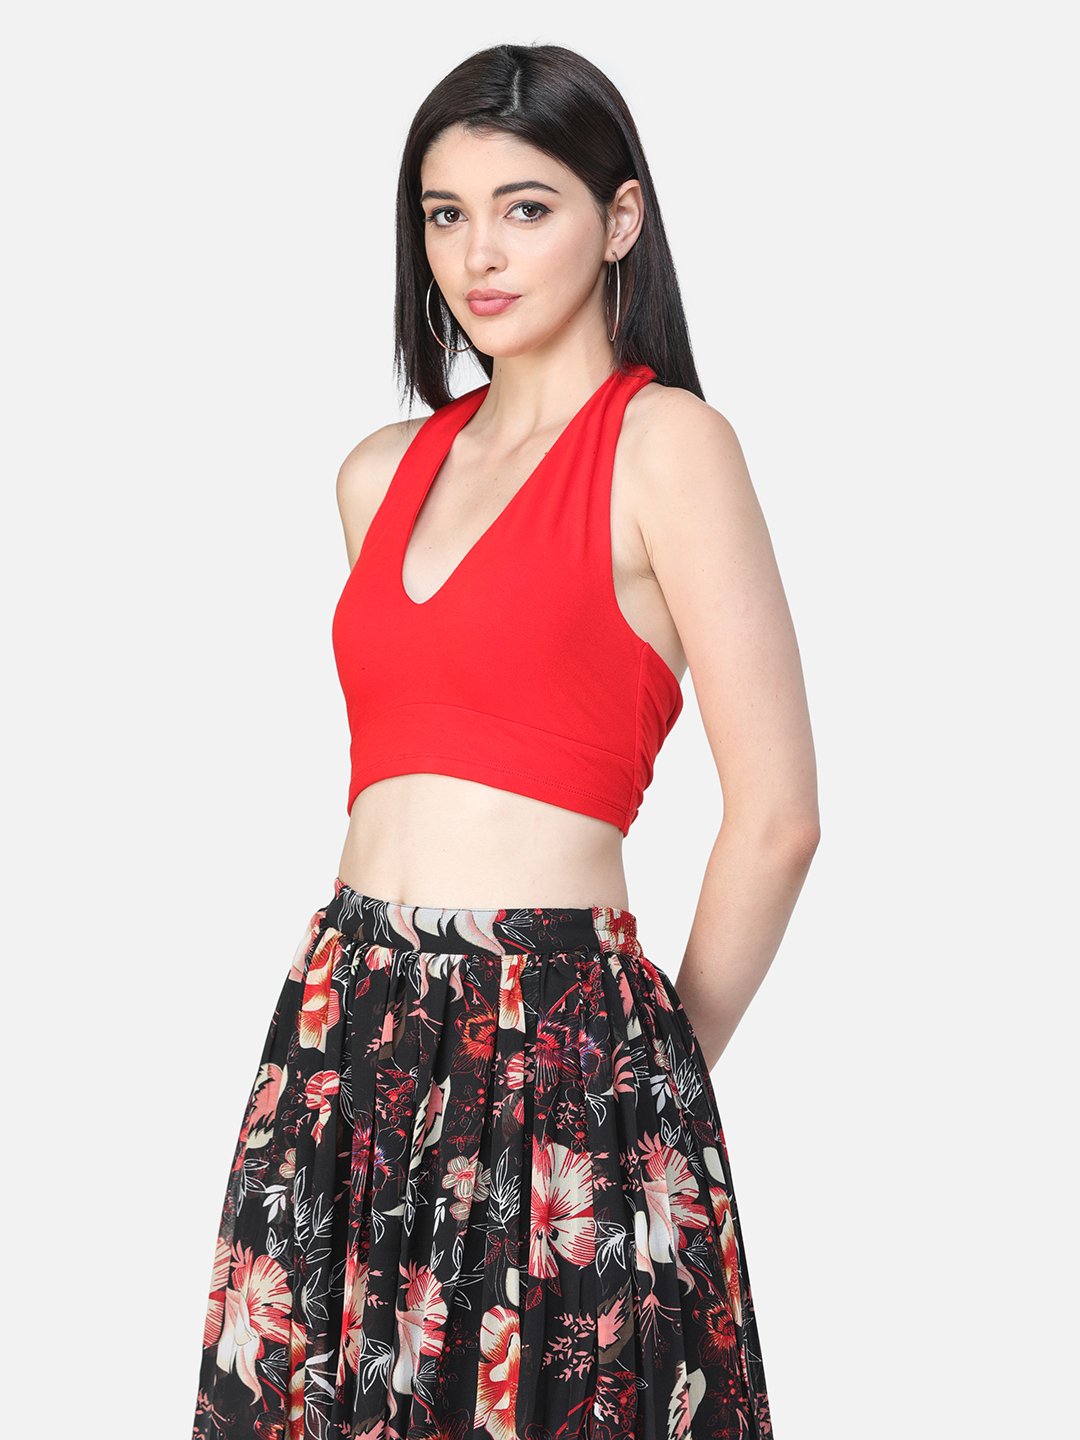 SCORPIUS SOLID RED CROP TOP